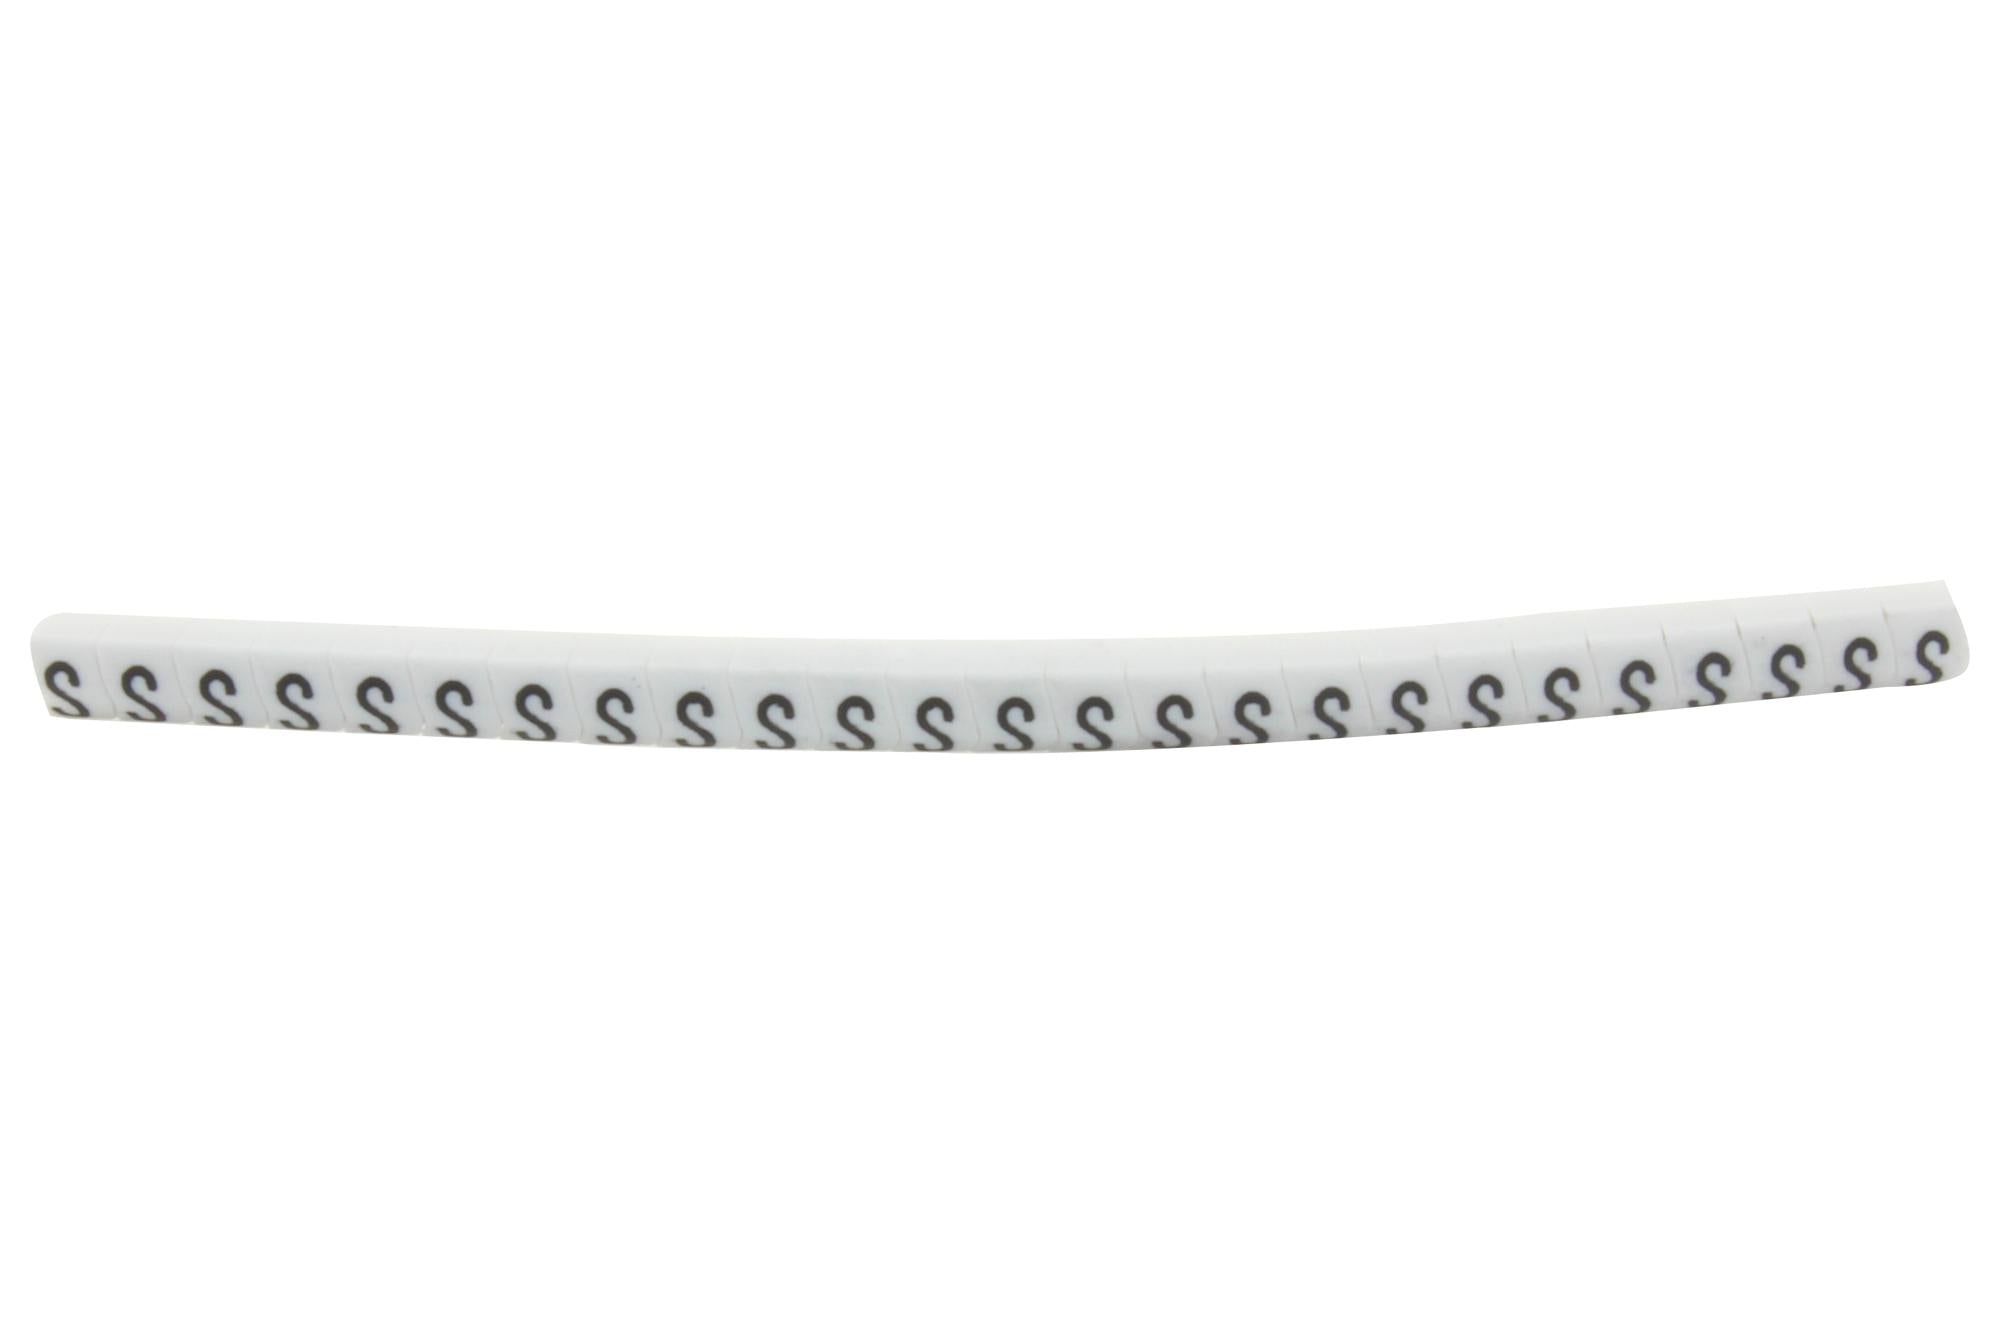 901-11042 CABLE MARKER, PRE PRINTED, PVC, WHITE HELLERMANNTYTON